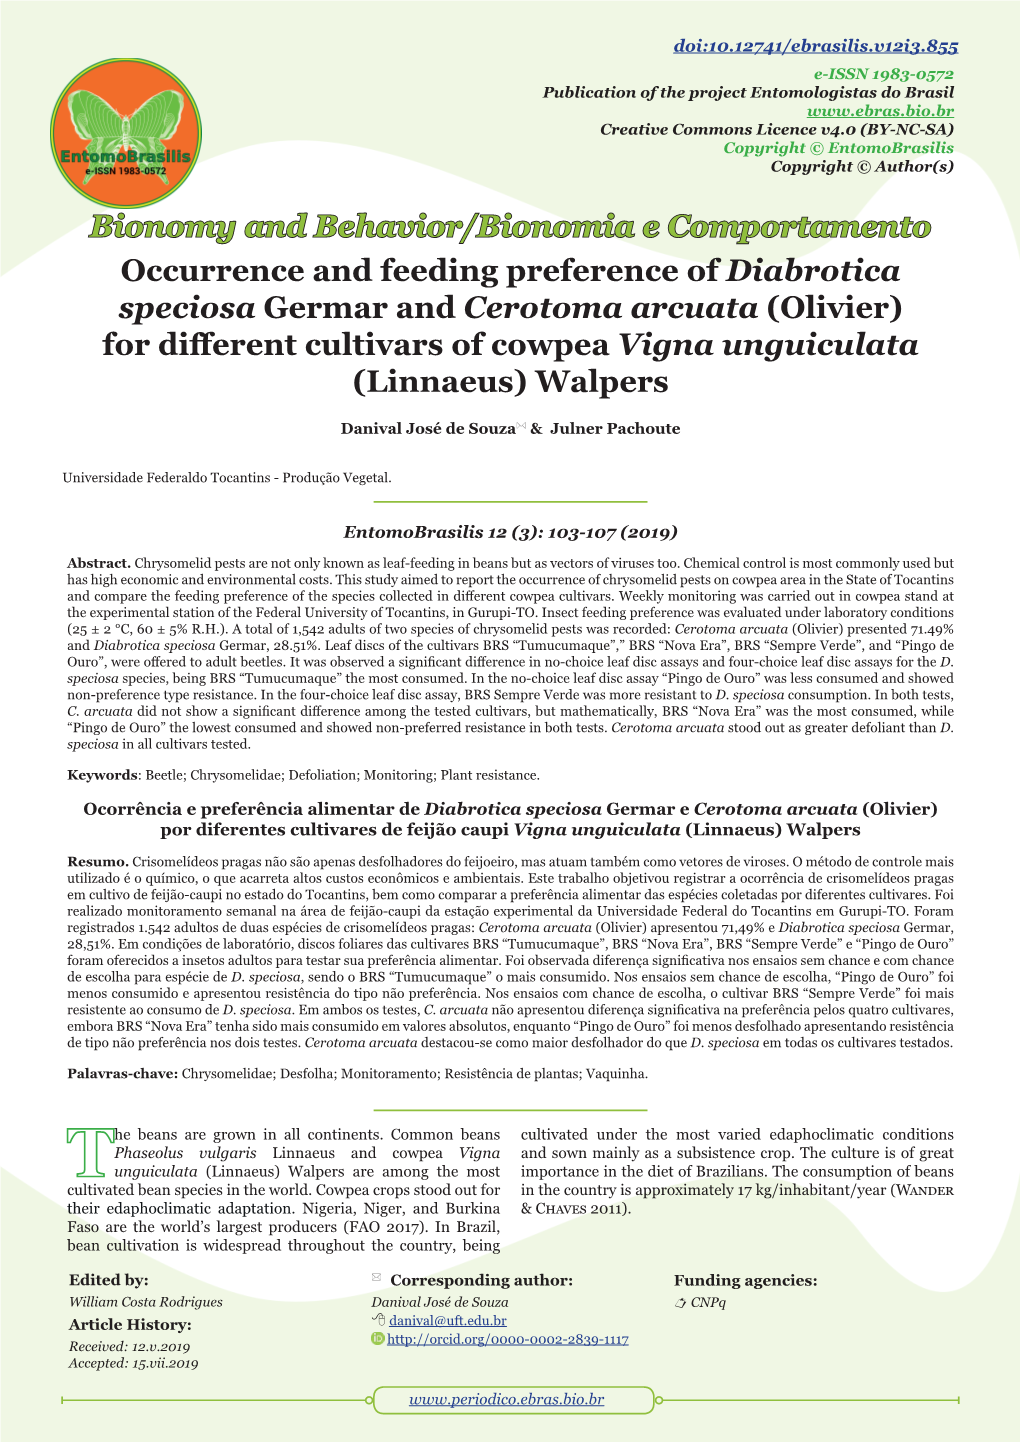 Occurrence and Feeding Preference of Diabrotica Speciosa Germar and Cerotoma Arcuata (Olivier) for Different Cultivars of Cowpeavigna Unguiculata (Linnaeus) Walpers